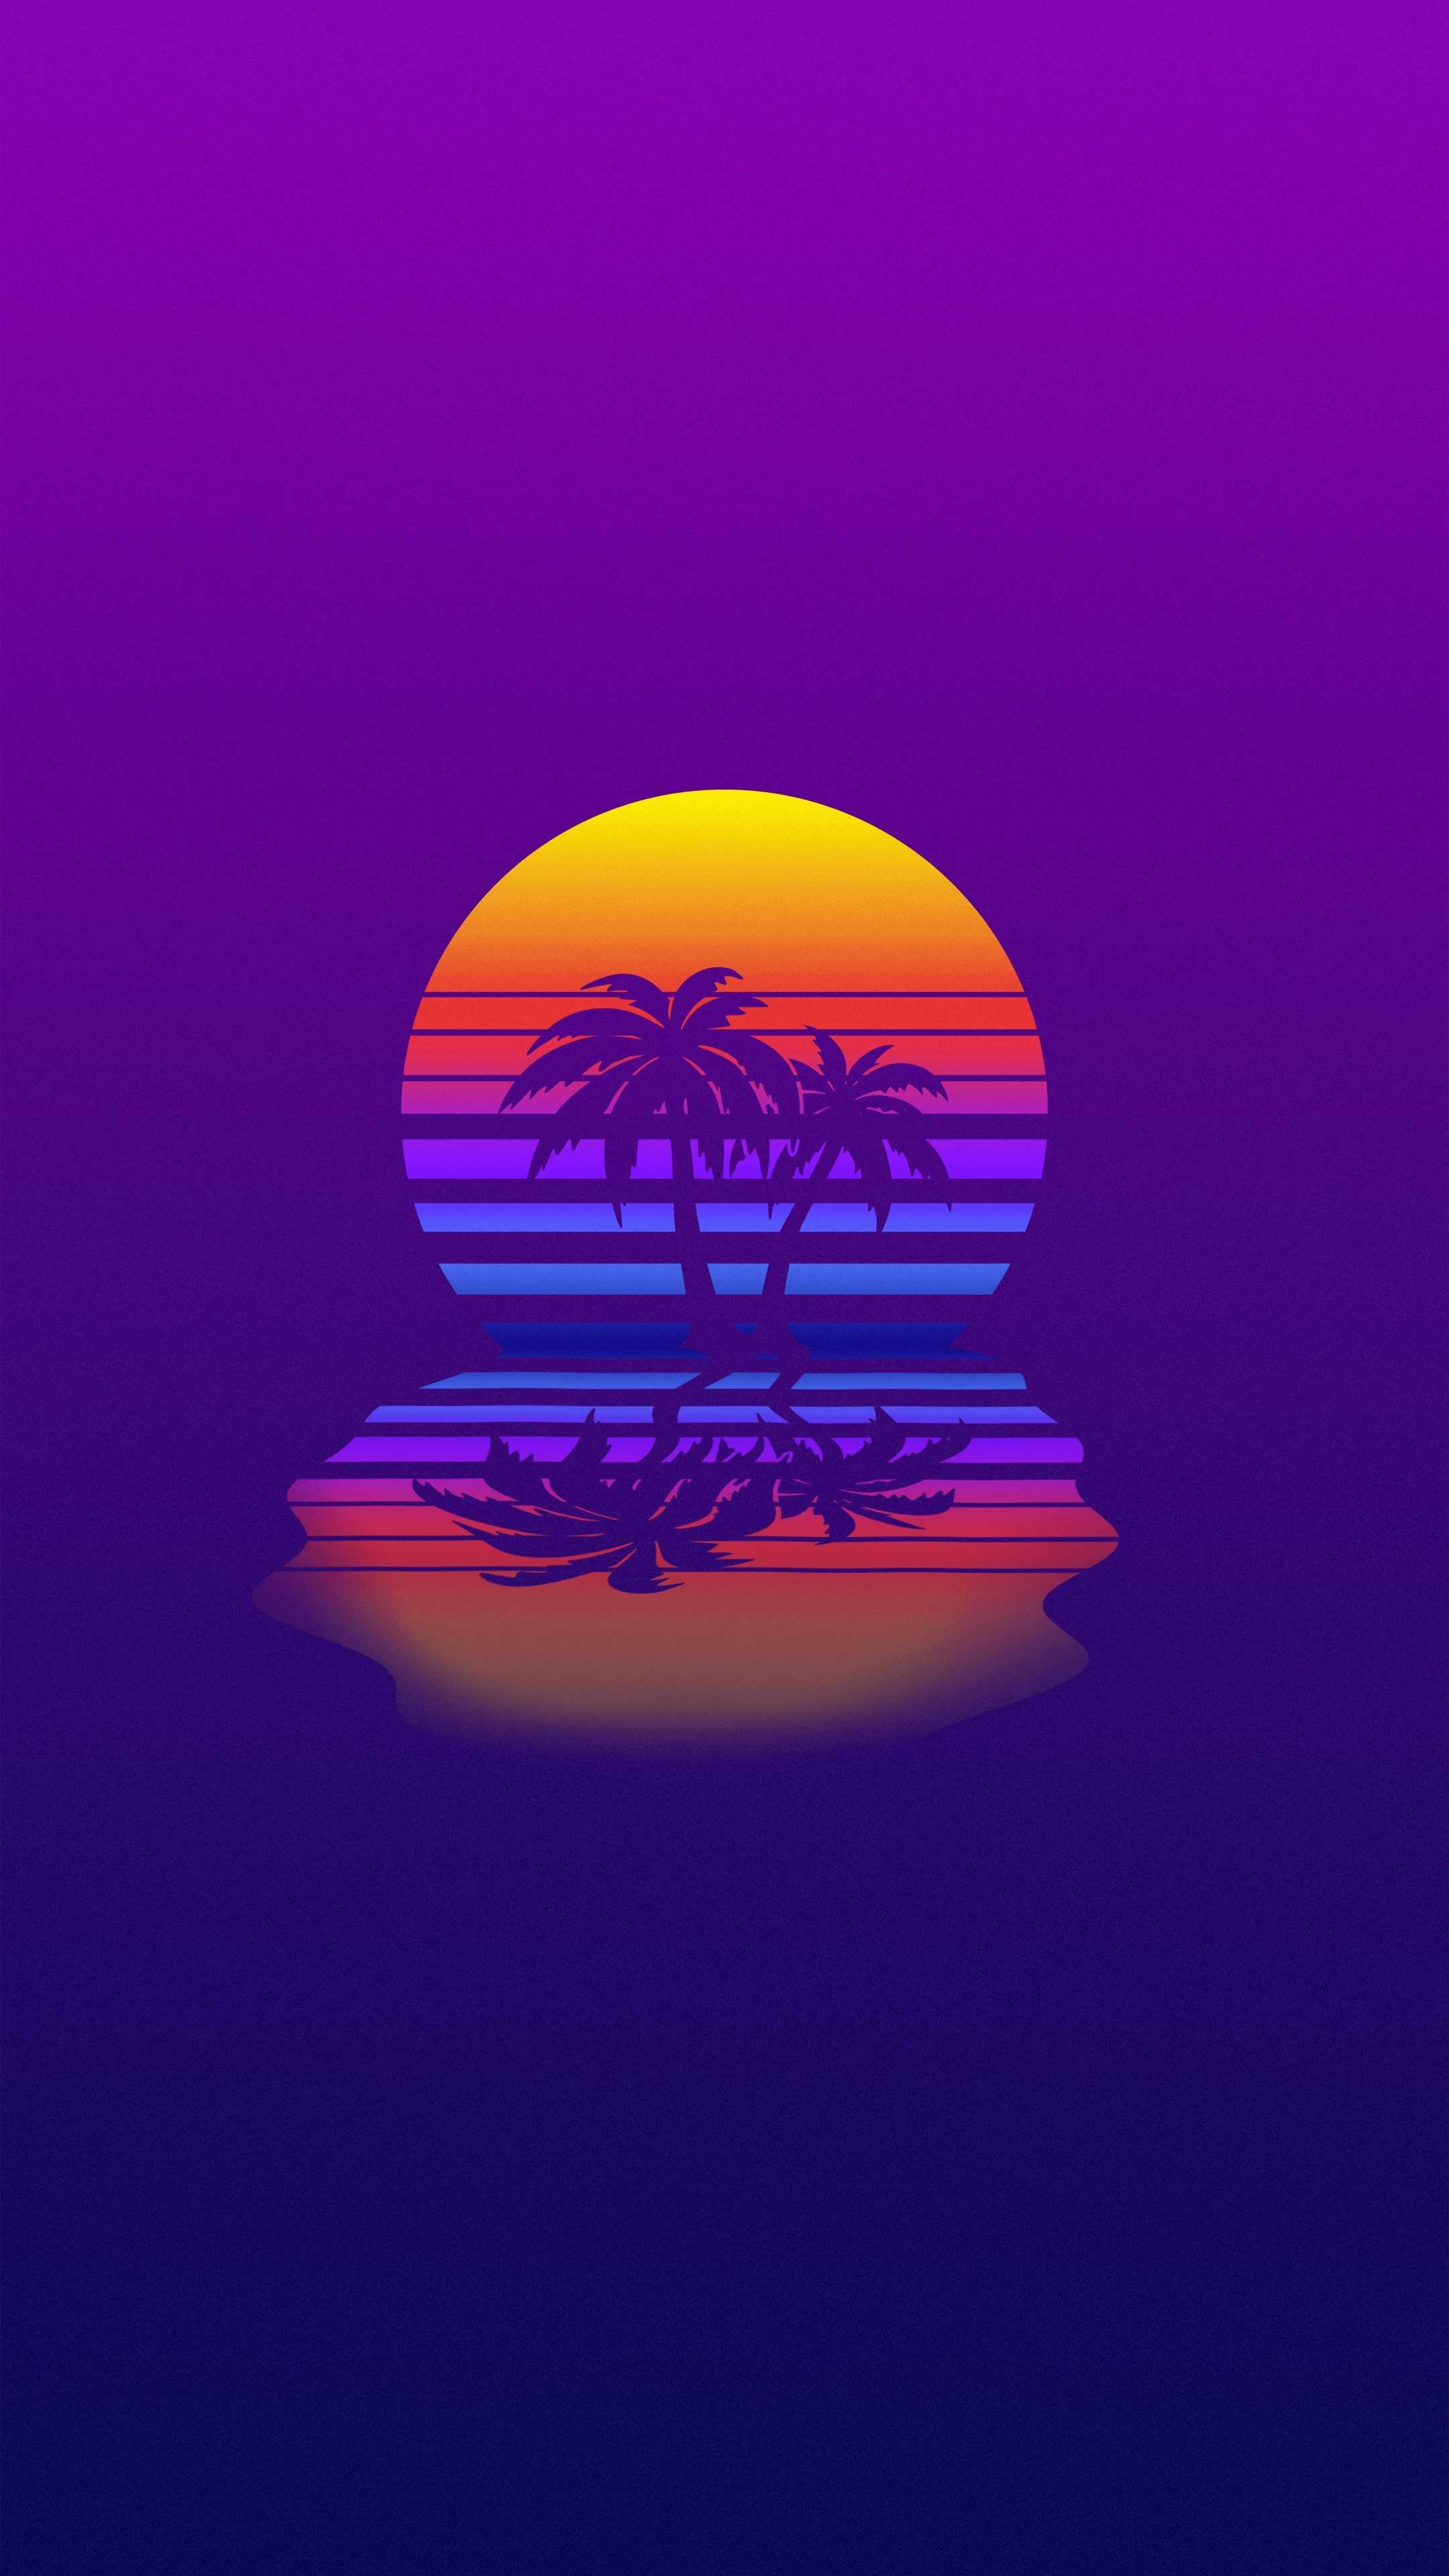 A purple and pink sunset with palm trees - Vaporwave